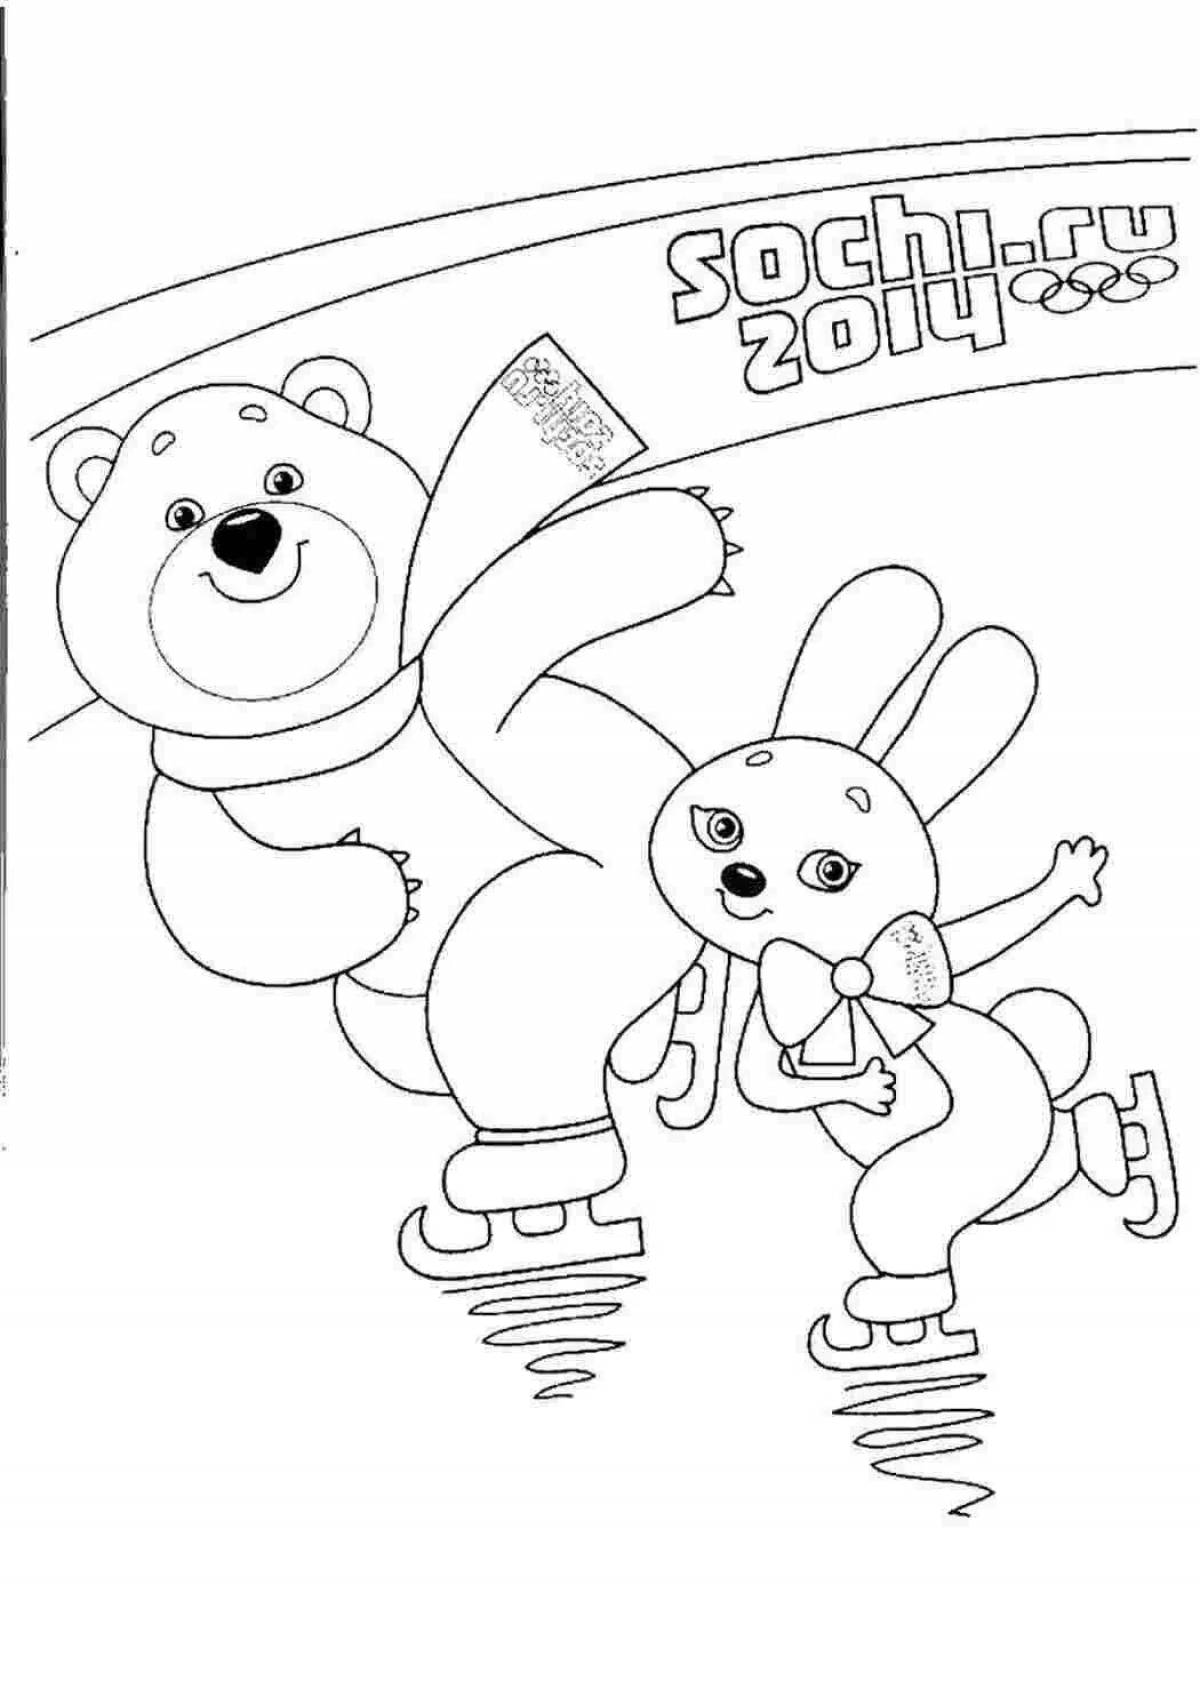 Creative olympic bear coloring for kids